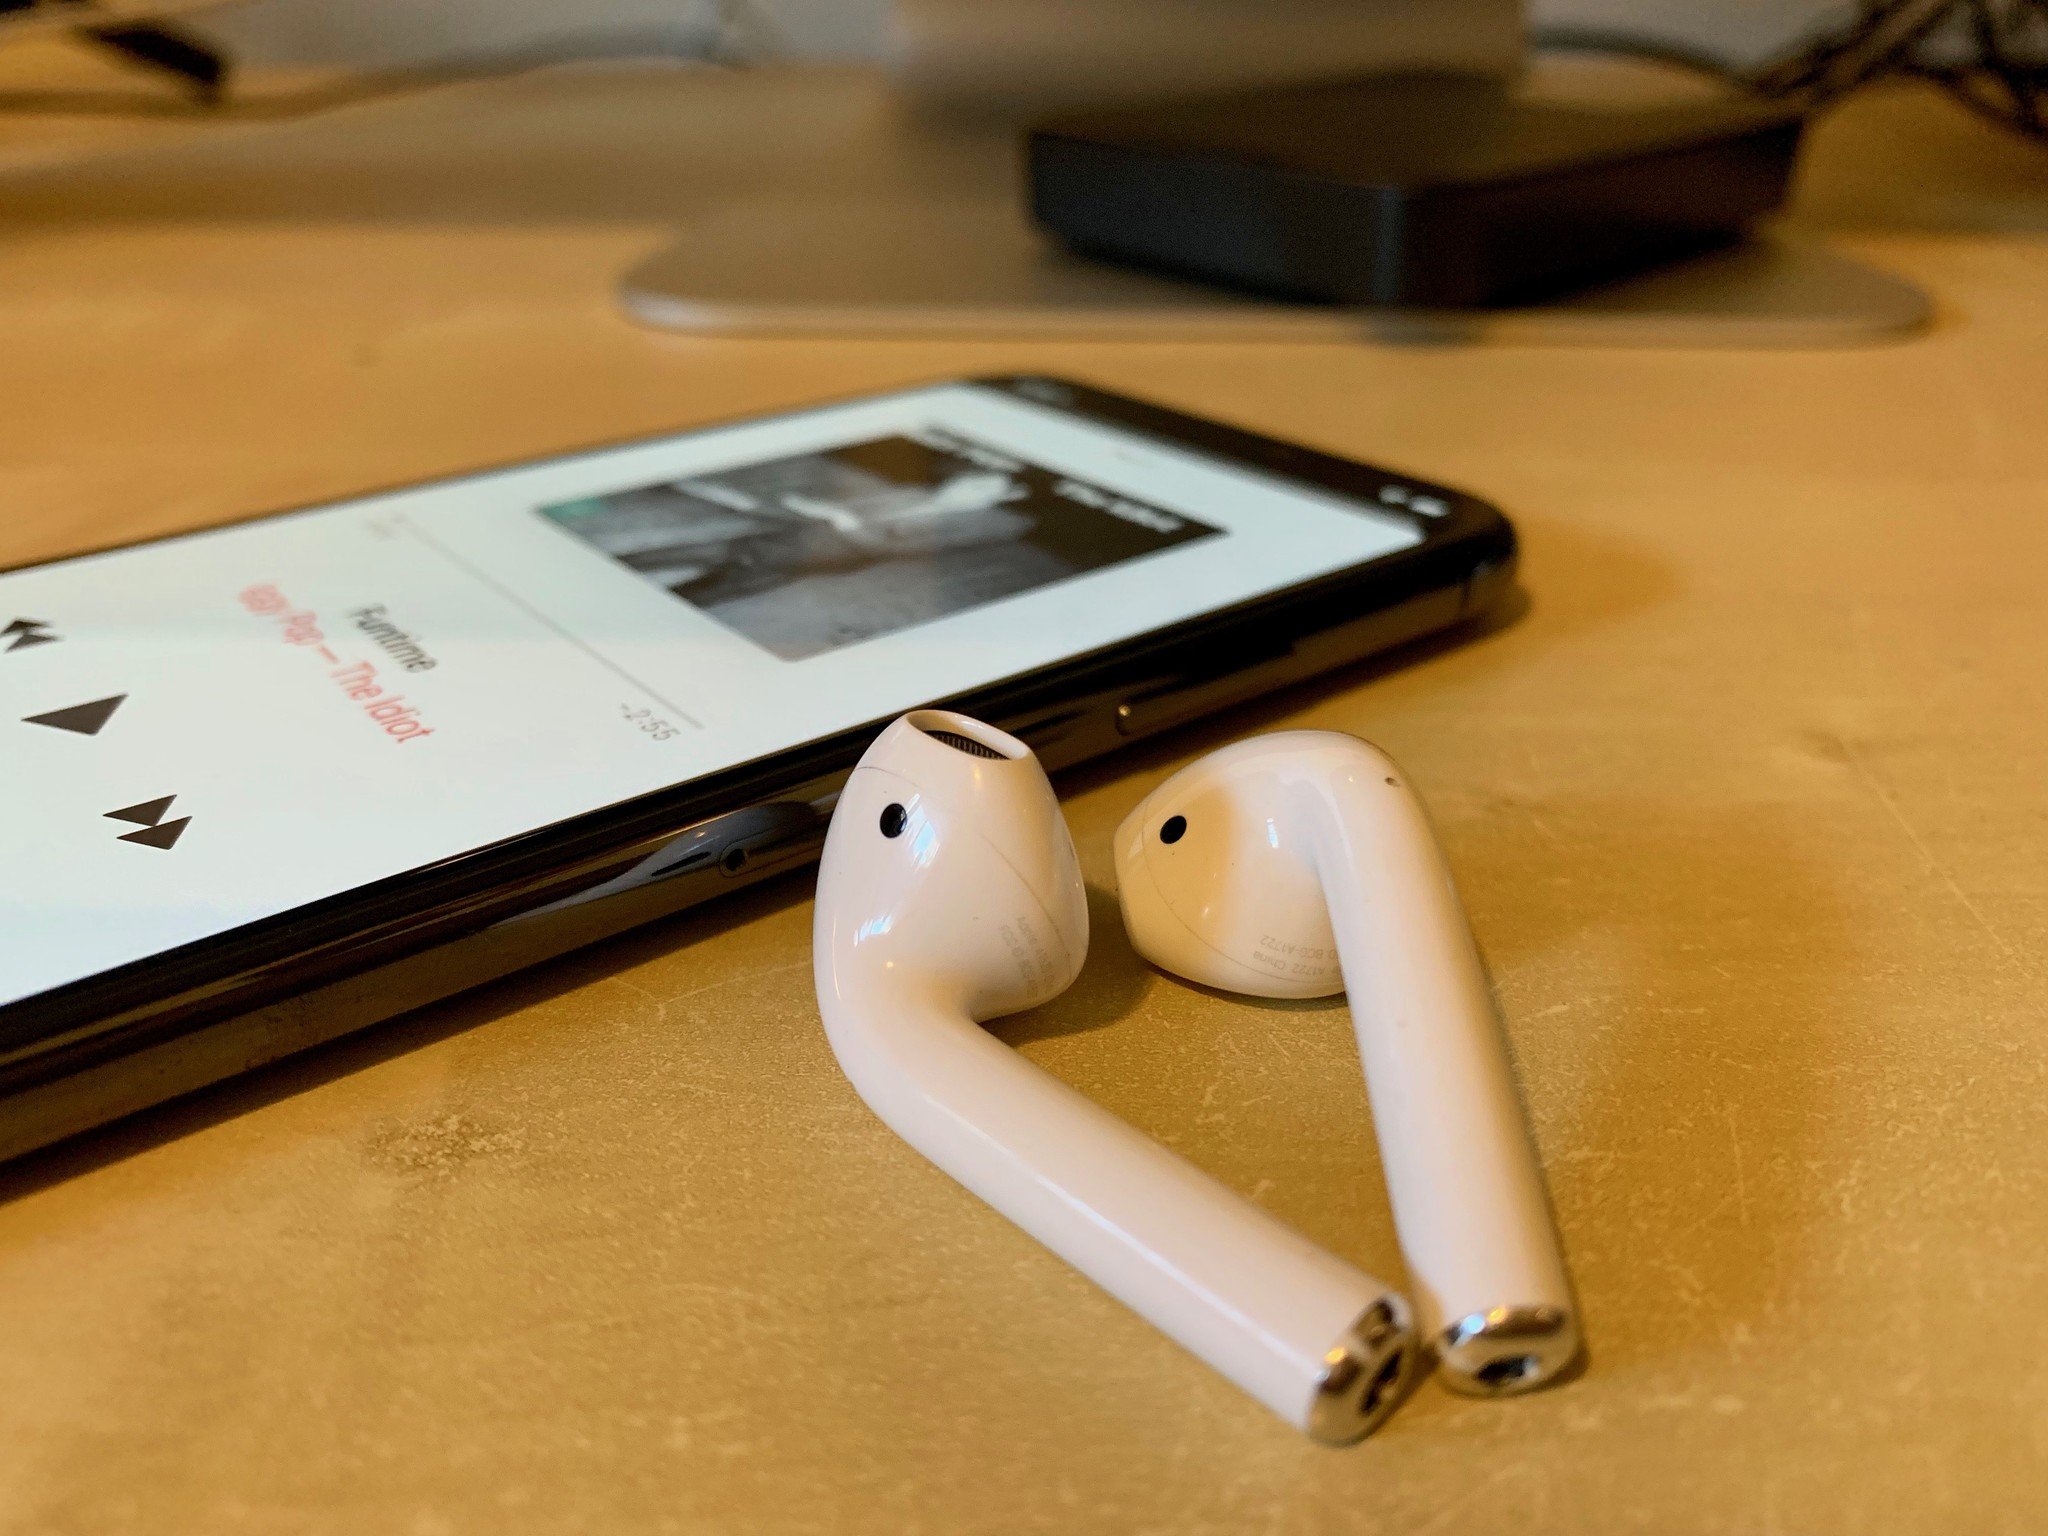 Apple Could Launch AirPods Pro for $250 Later This Month